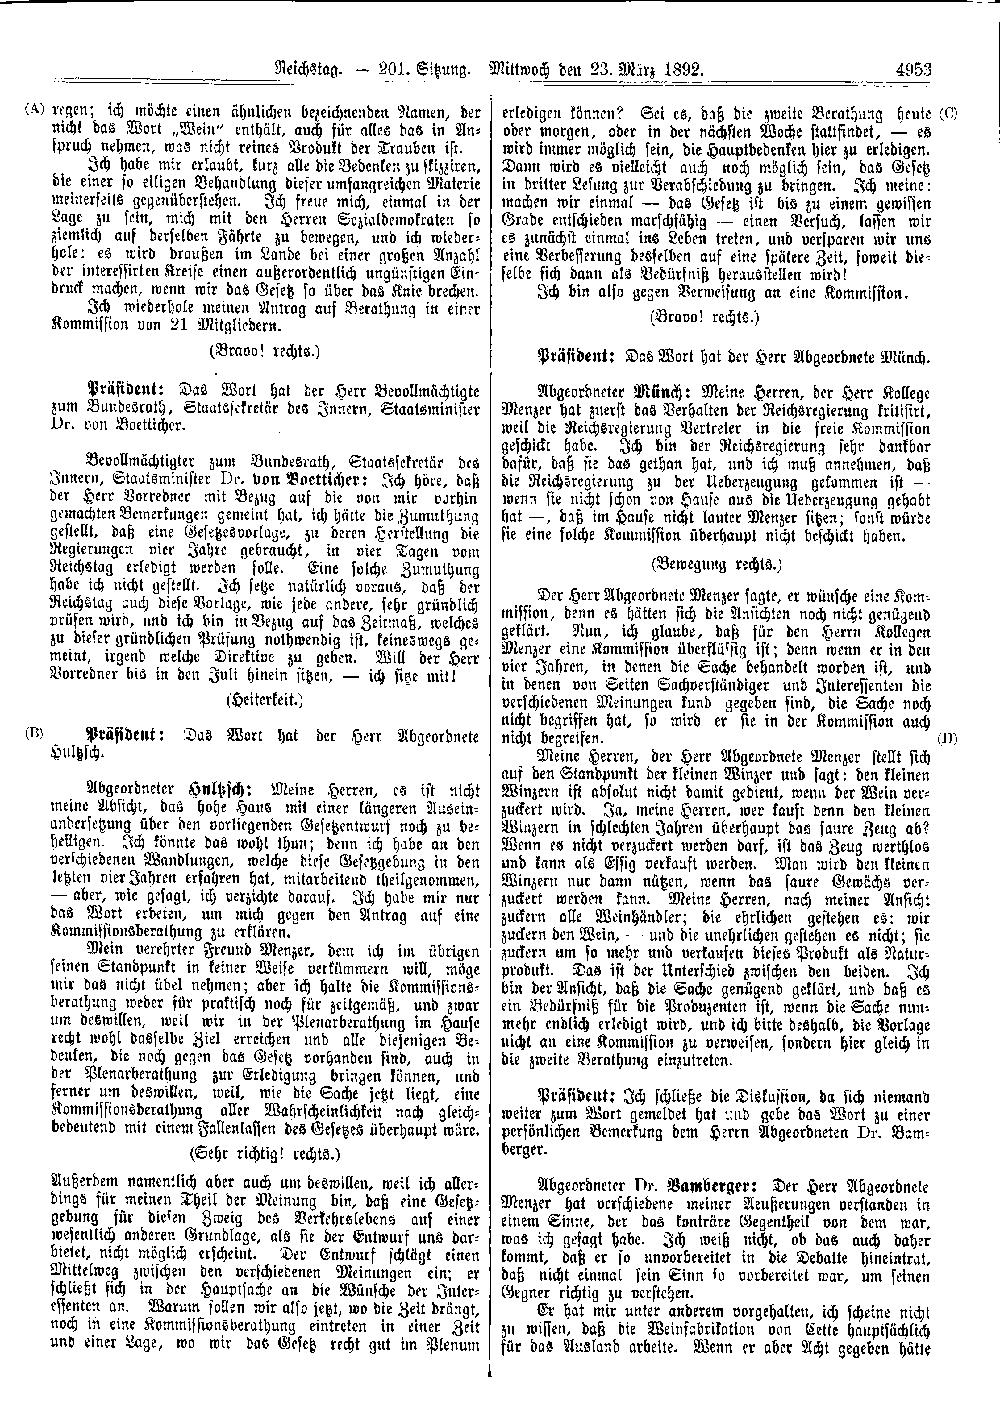 Scan of page 4953